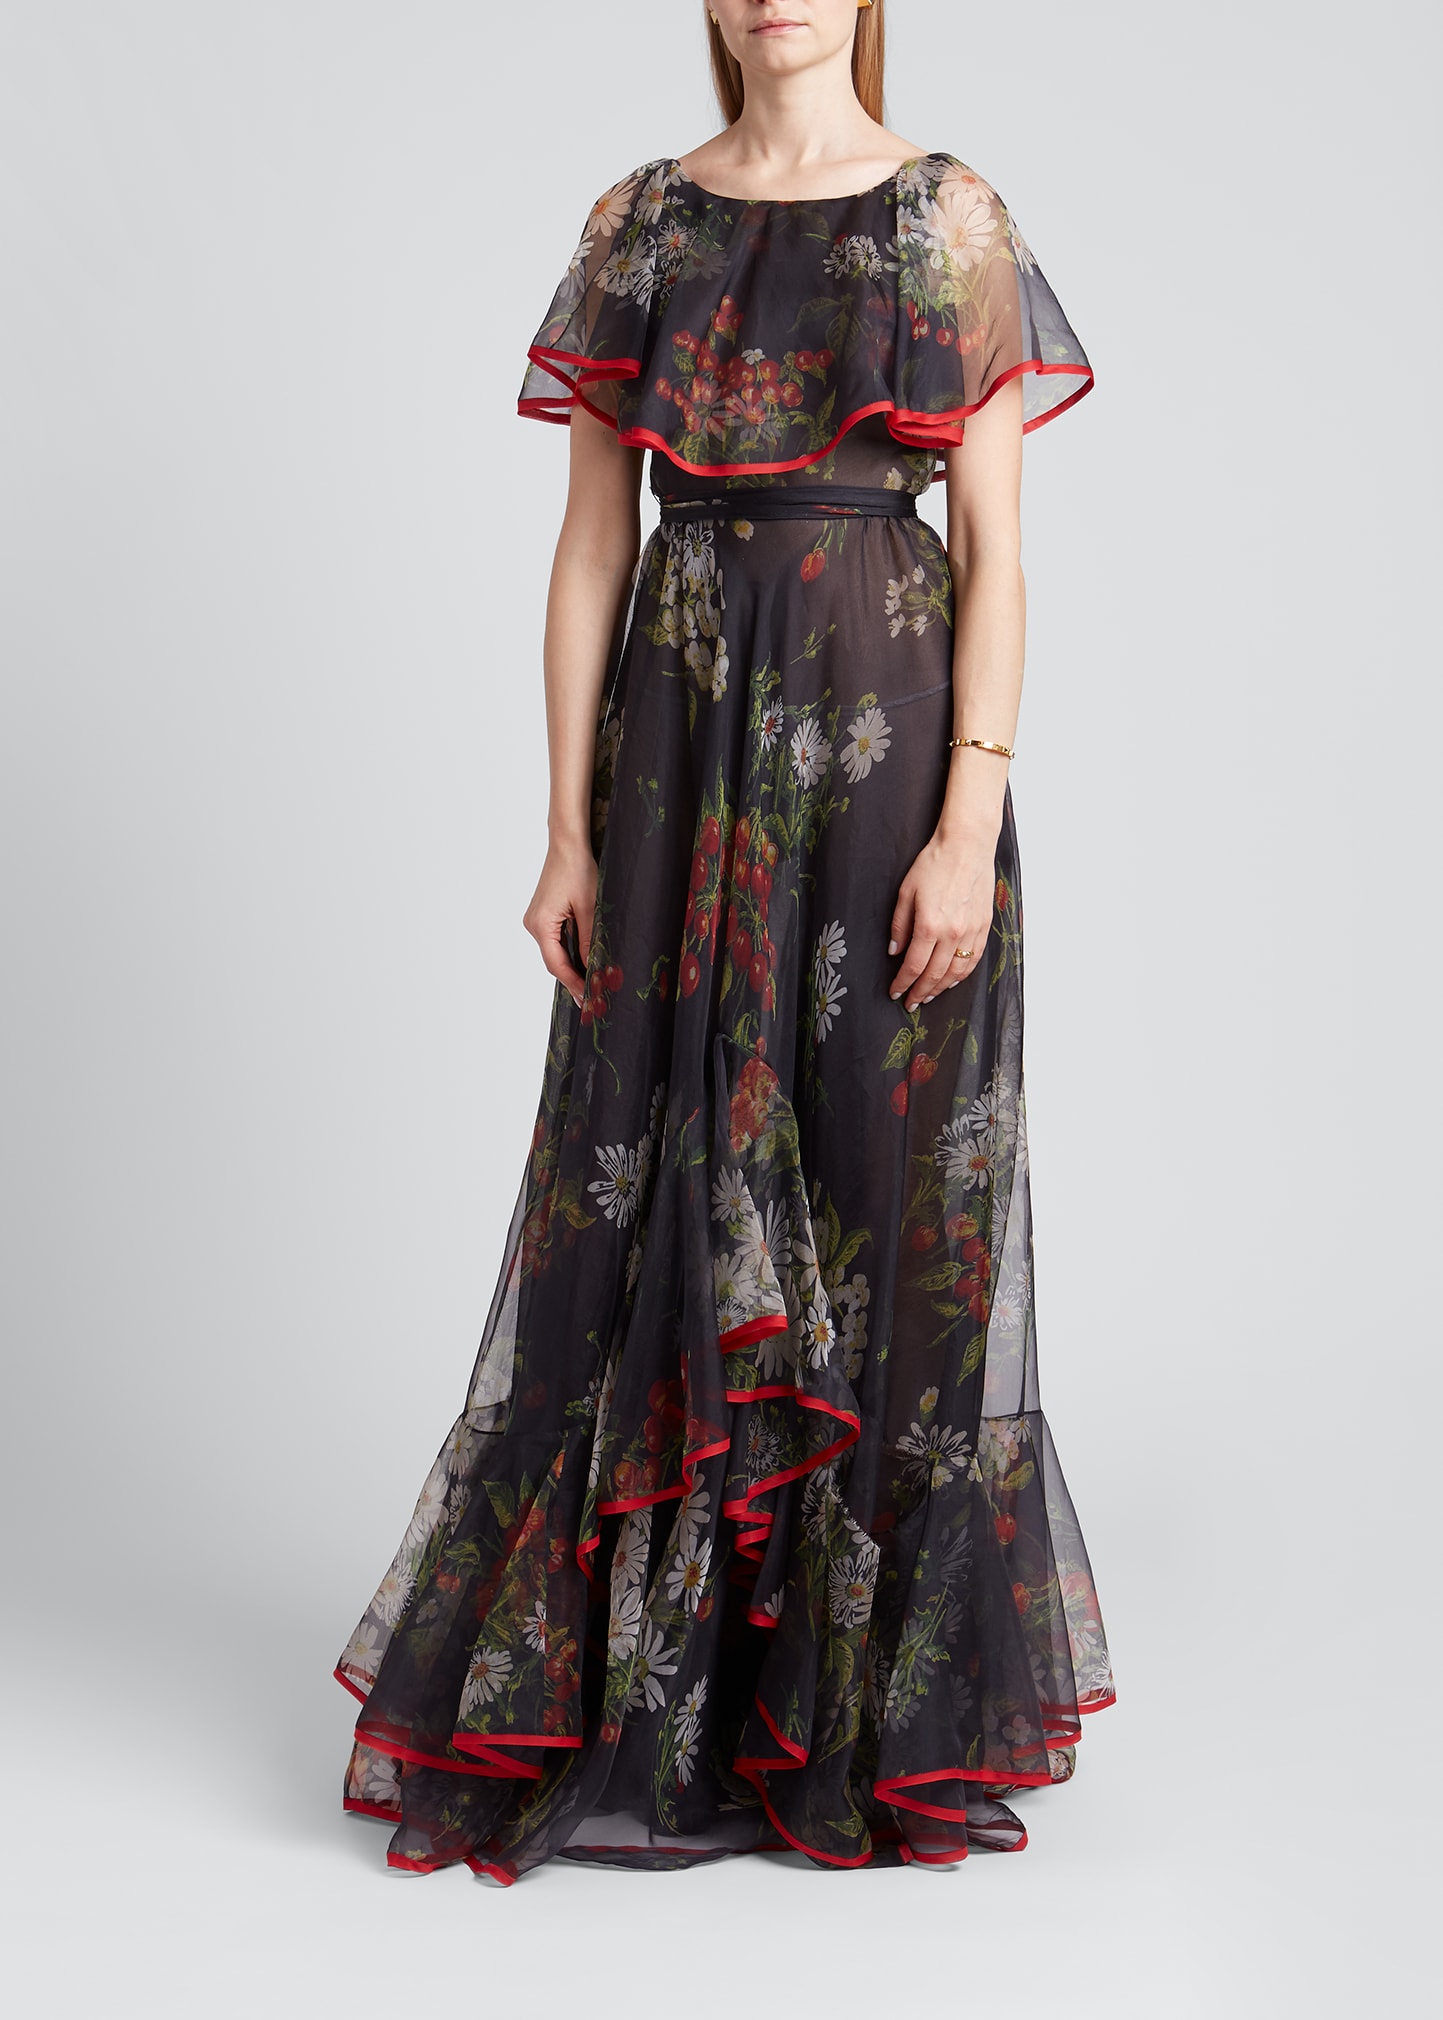 VALENTINO Gowns for Women | ModeSens